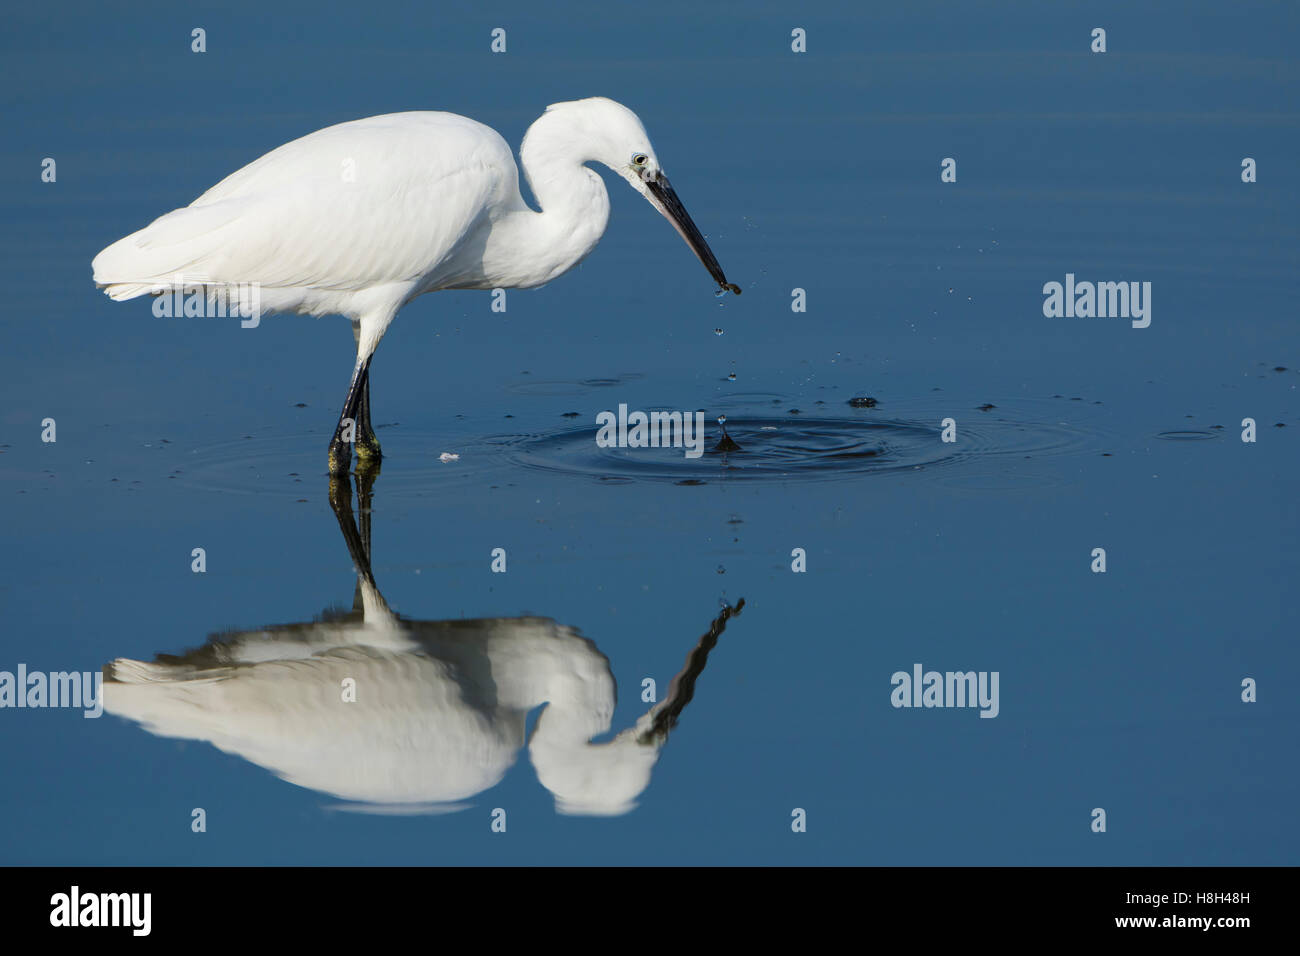 A Little Egret (Egretta garzetta) wading and feeding in shallow water, Rye Harbour Nature reserve, East Sussex, UK Stock Photo